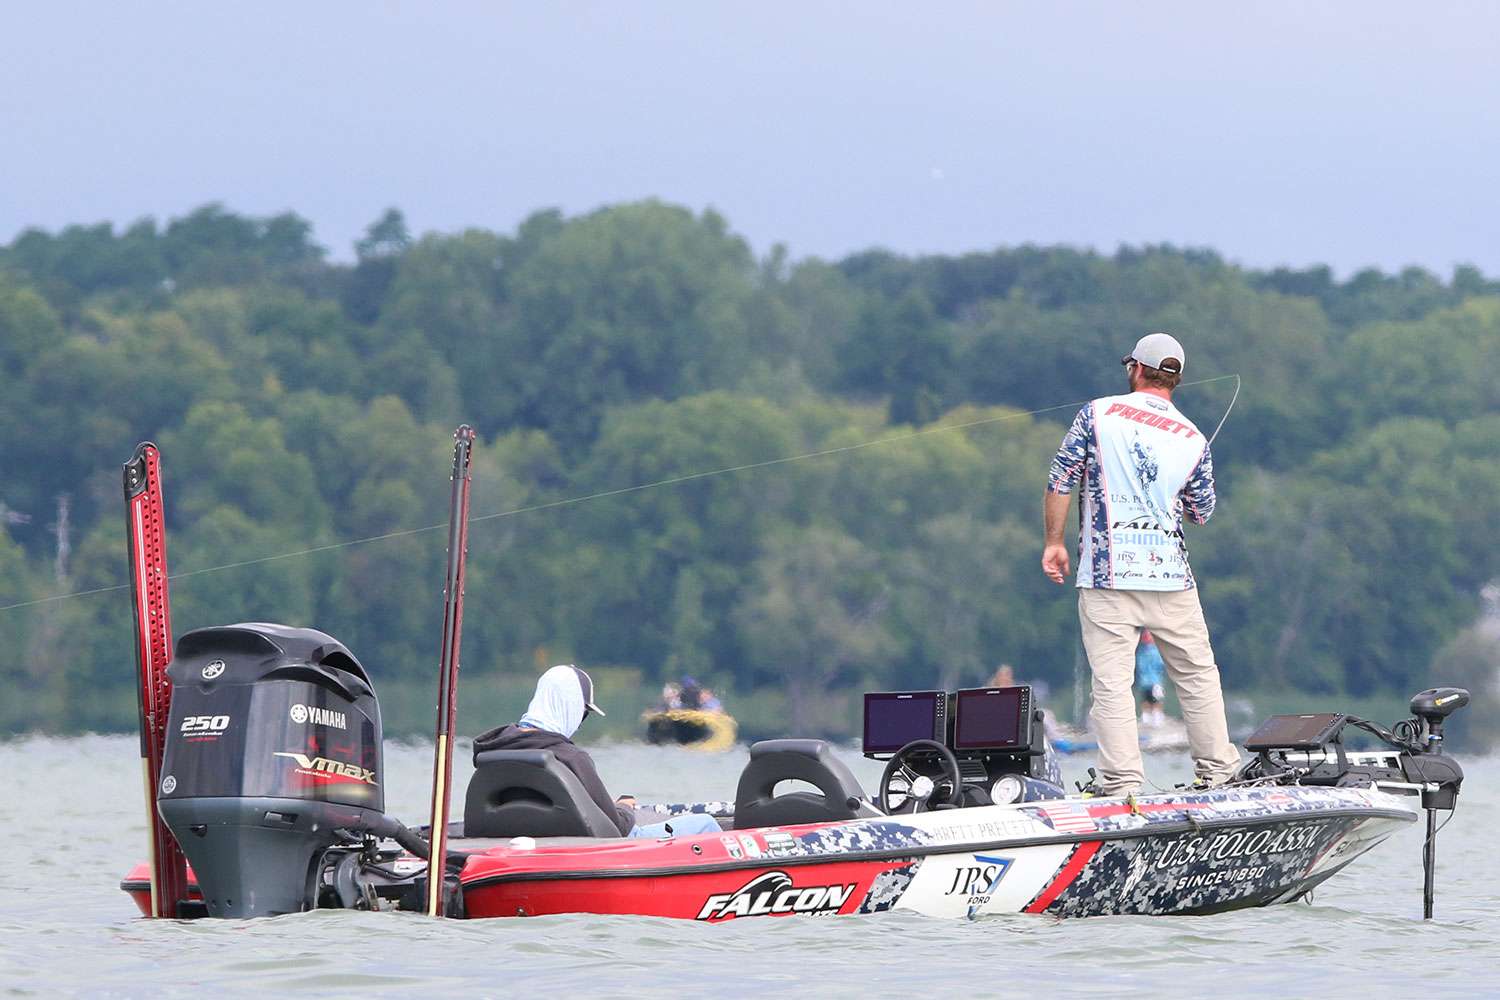 Catch up with Brad Preuett, Cliff Prince and Mike Huff on the water on Semi-final Saturday at SiteOne Bassmaster Elite at Cayuga Lake.